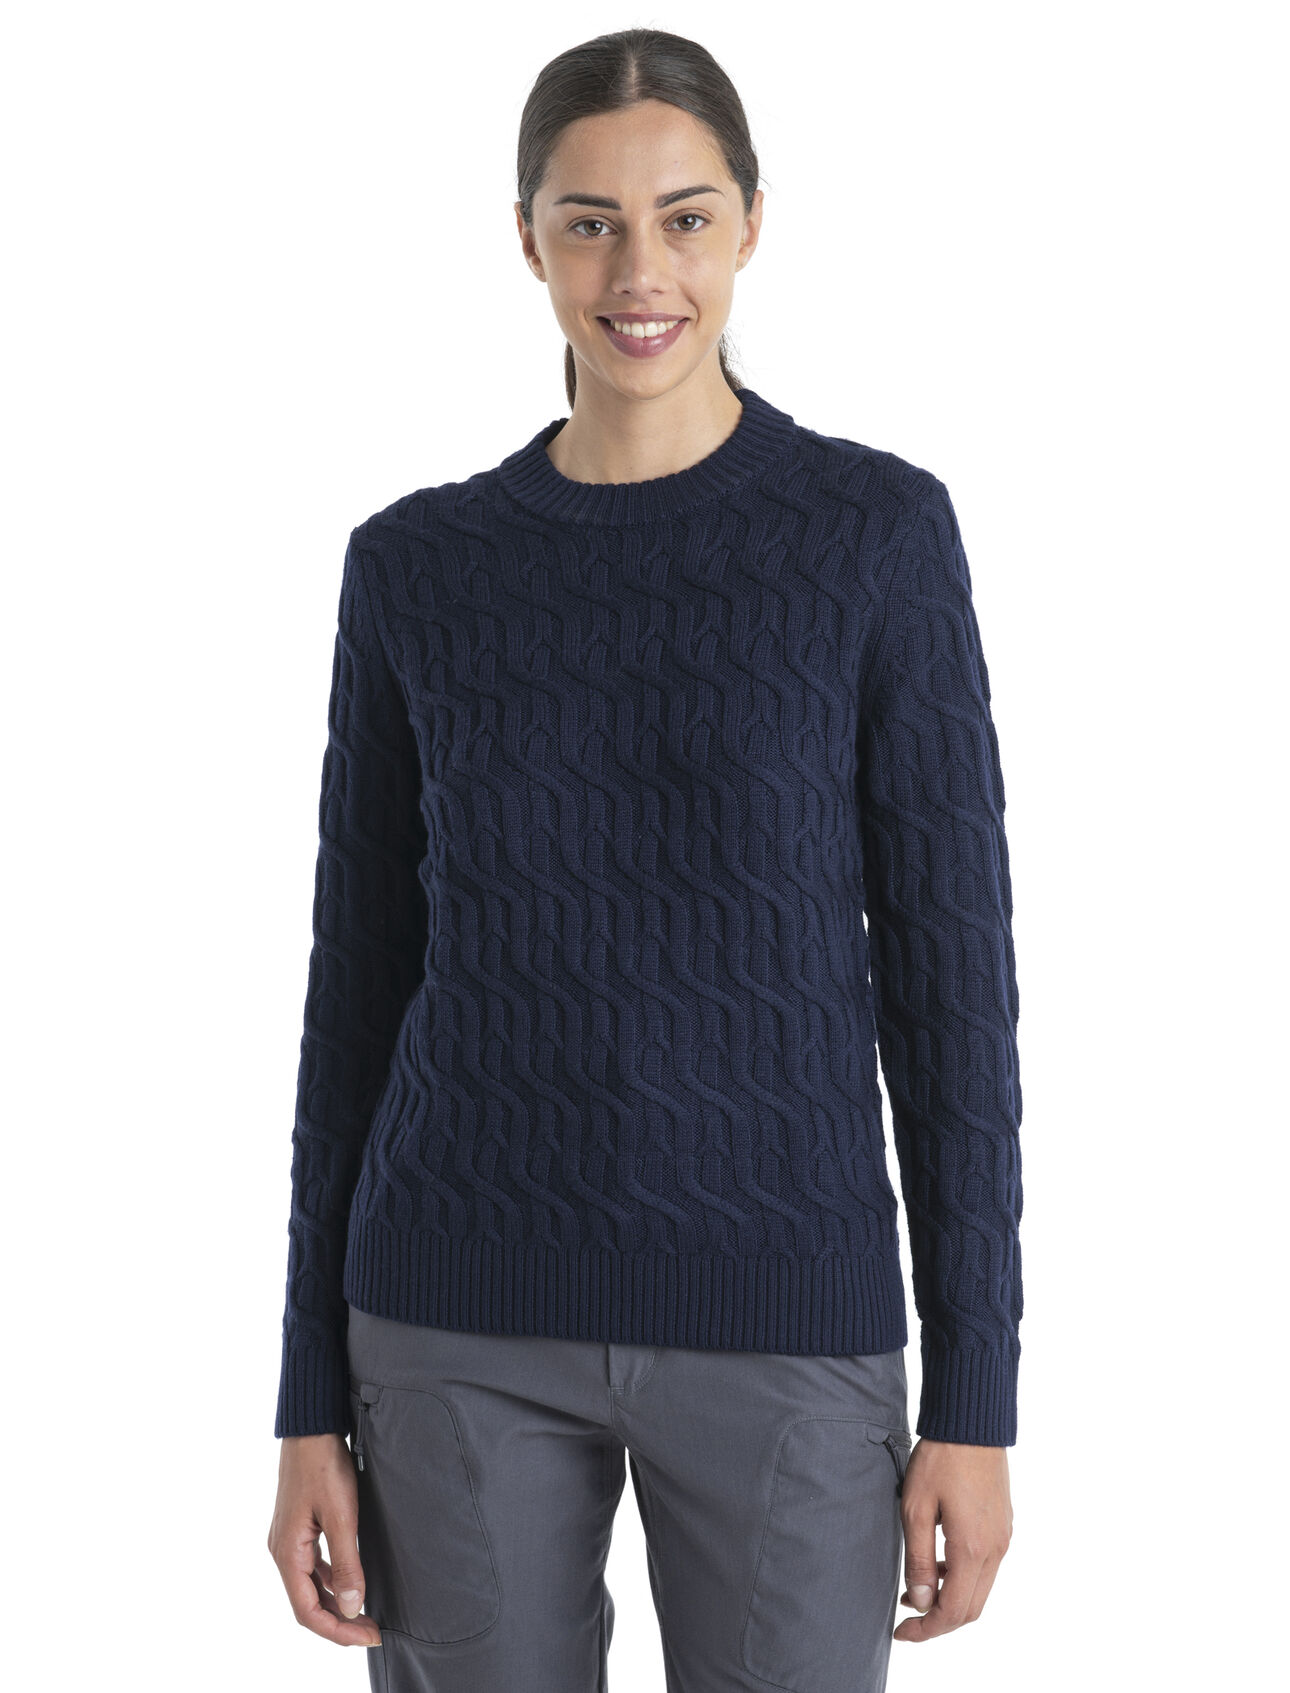 Womens Merino Cable Knit Crewe Sweater Ideal for winter travel and cold, snowy days around town, the Merino Cable Knit Crewe Sweater provides classic and cosy style with the natural benefits of 100% merino wool.